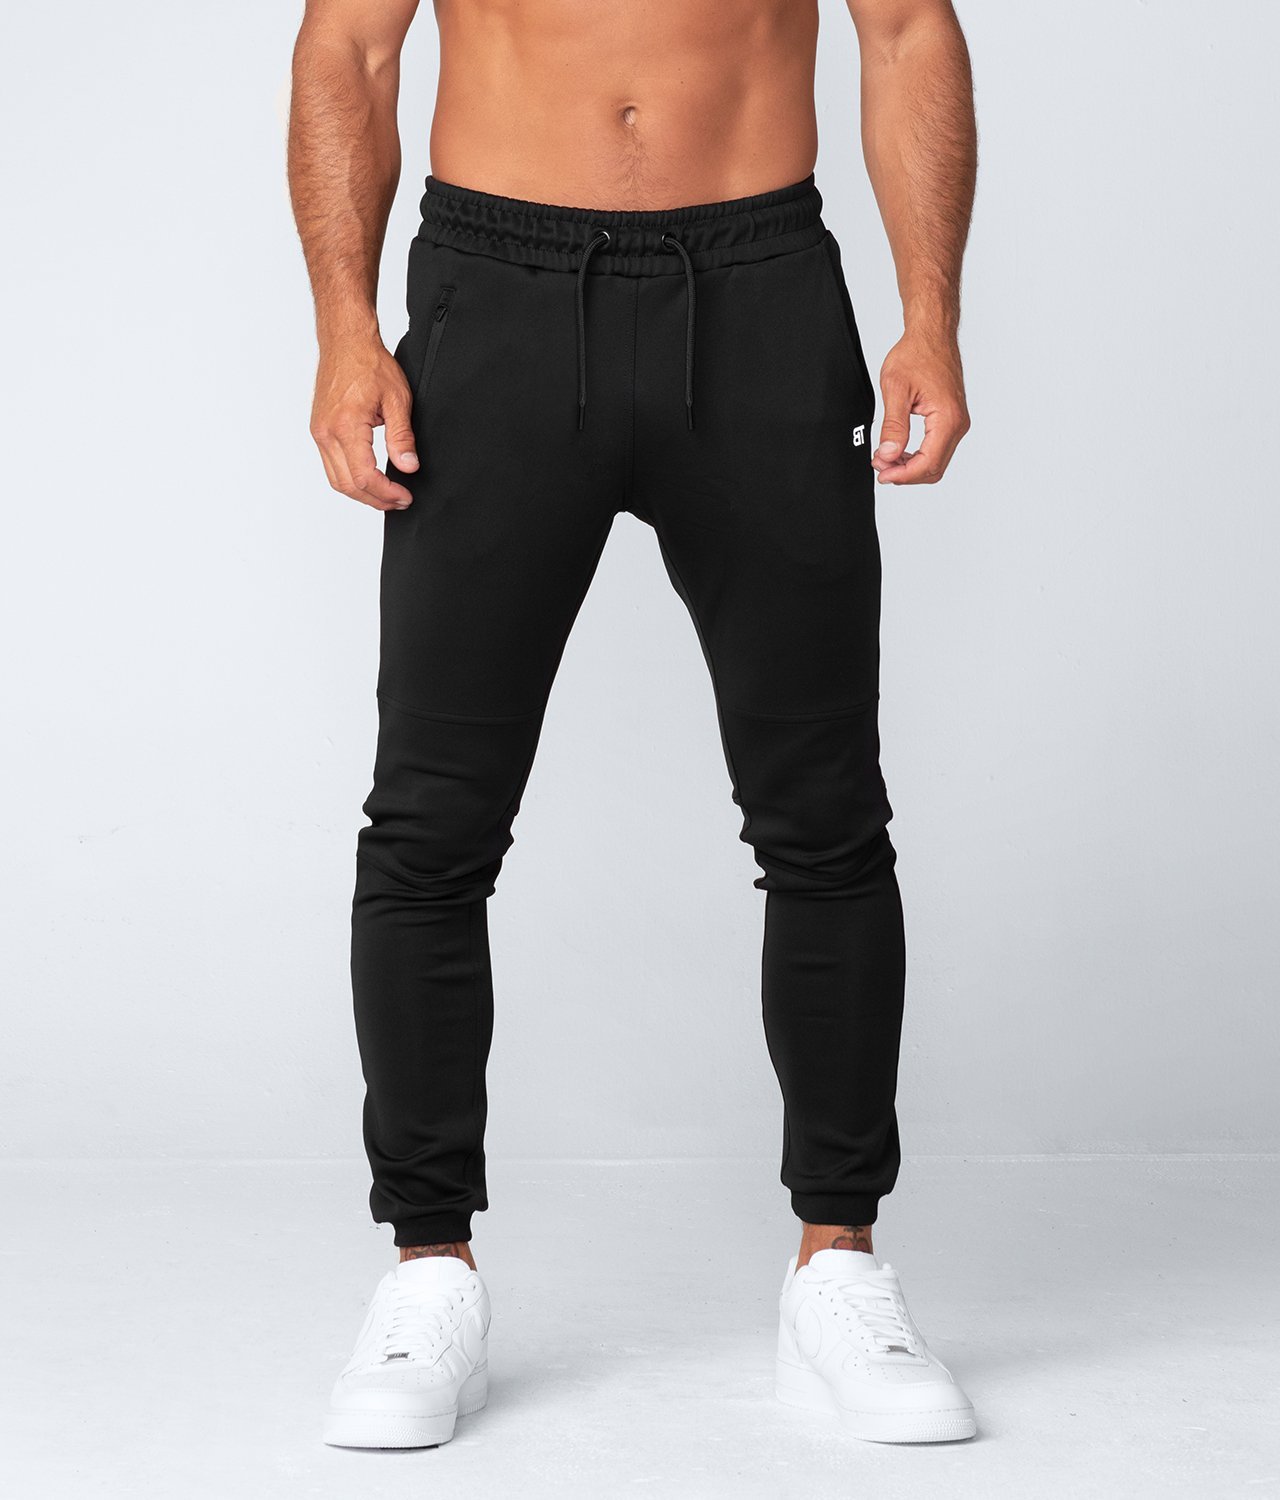 DSFEOIGY Mens Black Pants Clothing Joggers Stacked Sweatpants